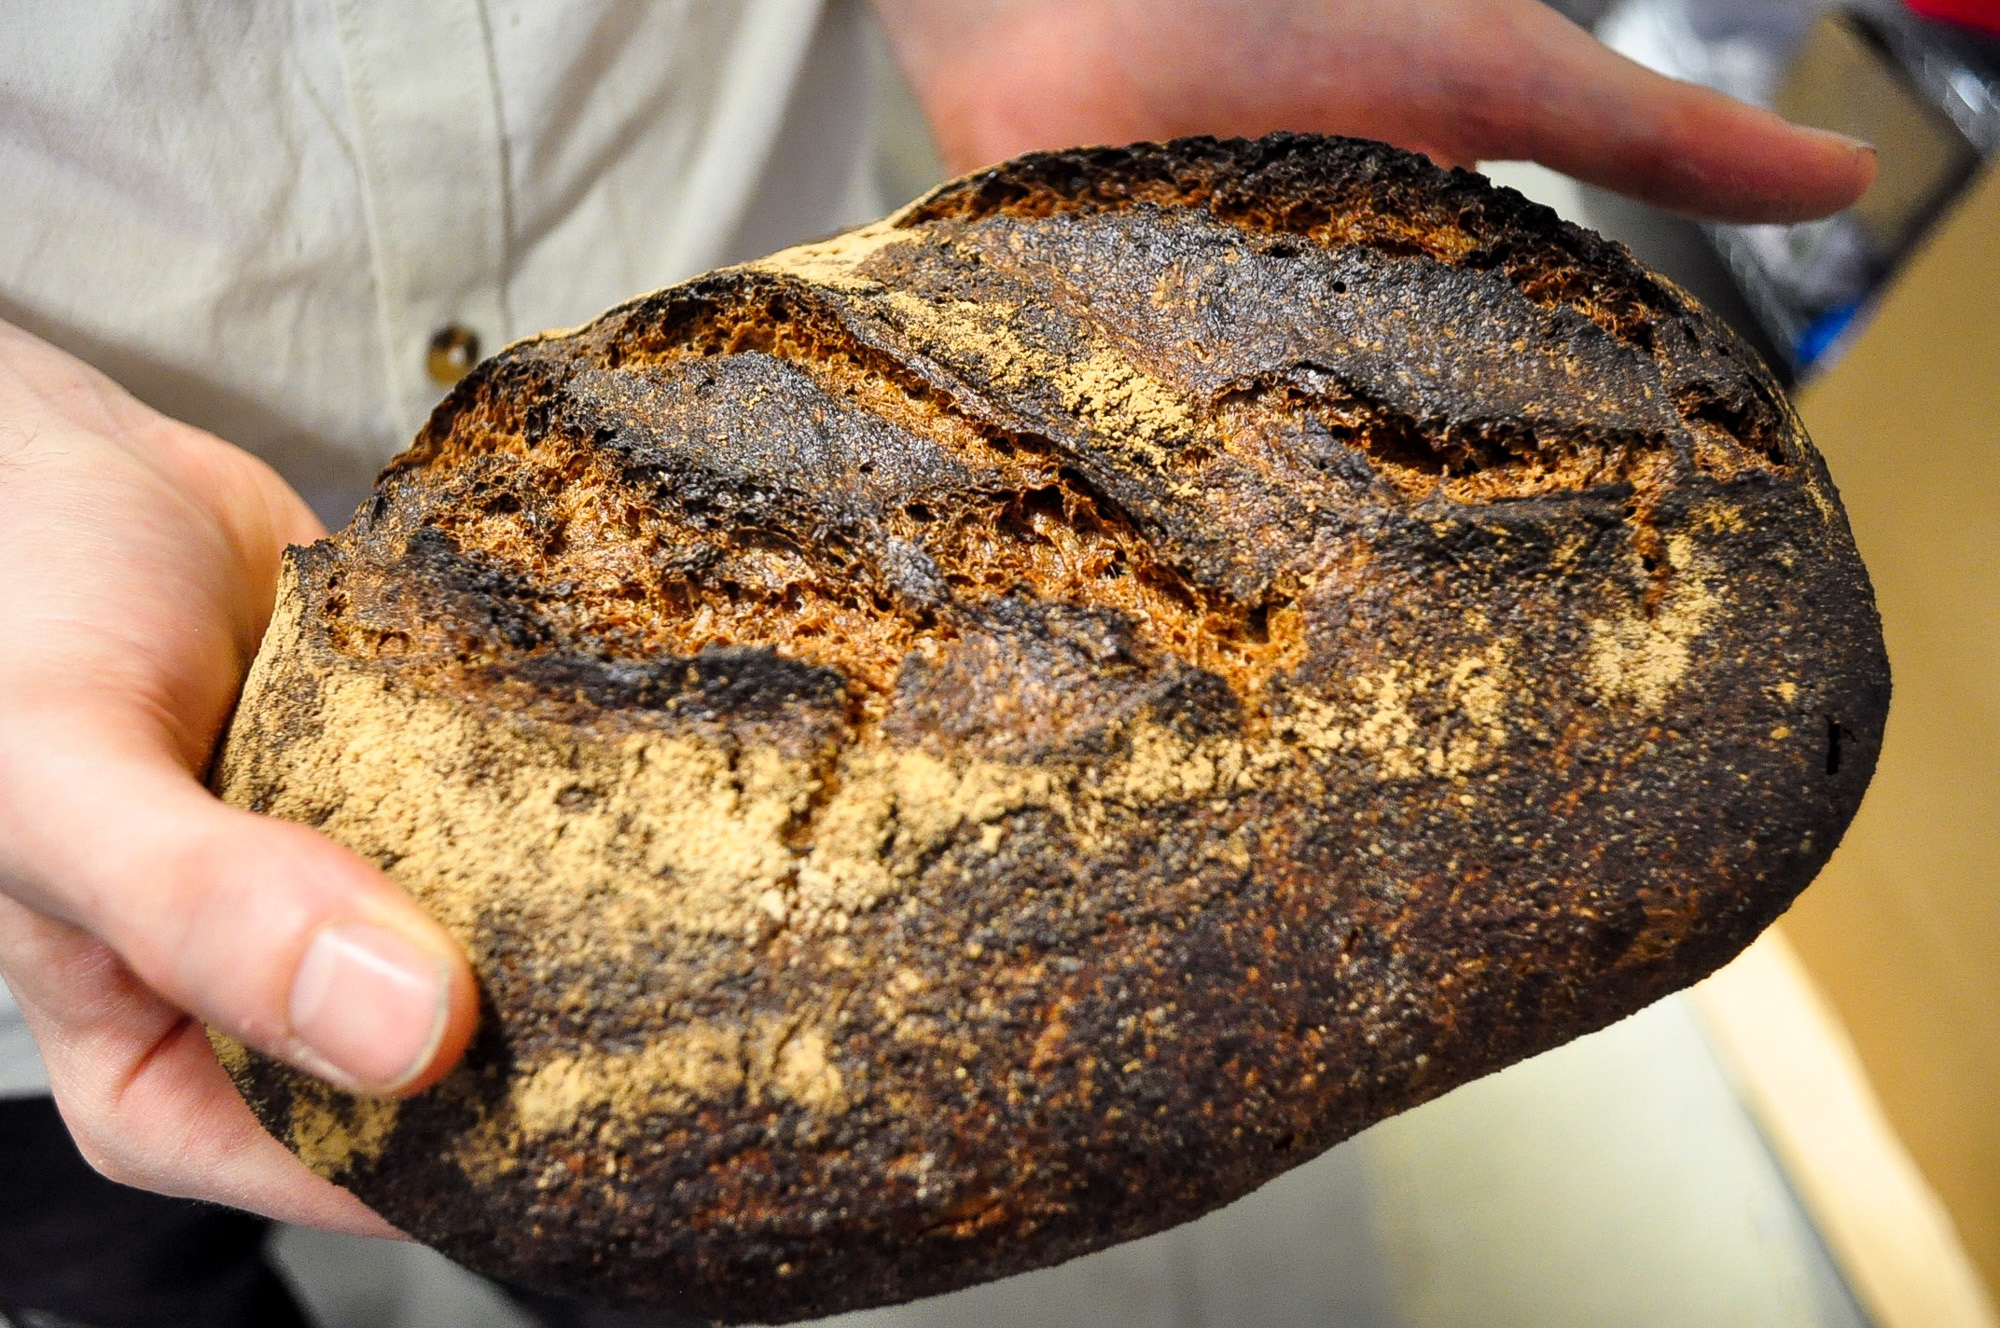 The D.C. bakery's loaves emerge from the oven in dark hues to match their intensely wheat-y flavors.